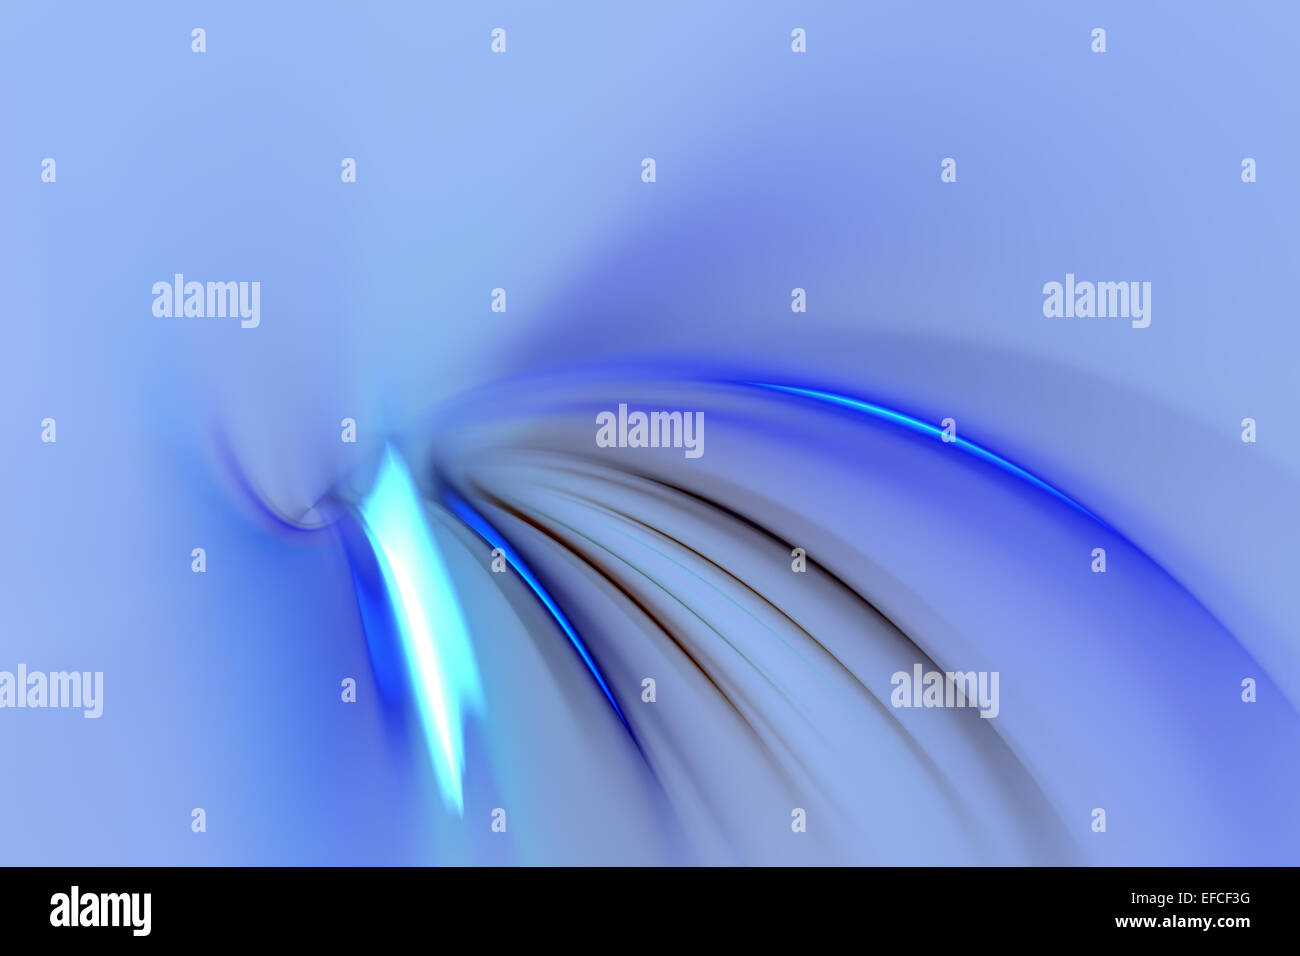 Blue Fractal Abstract Stock Photo